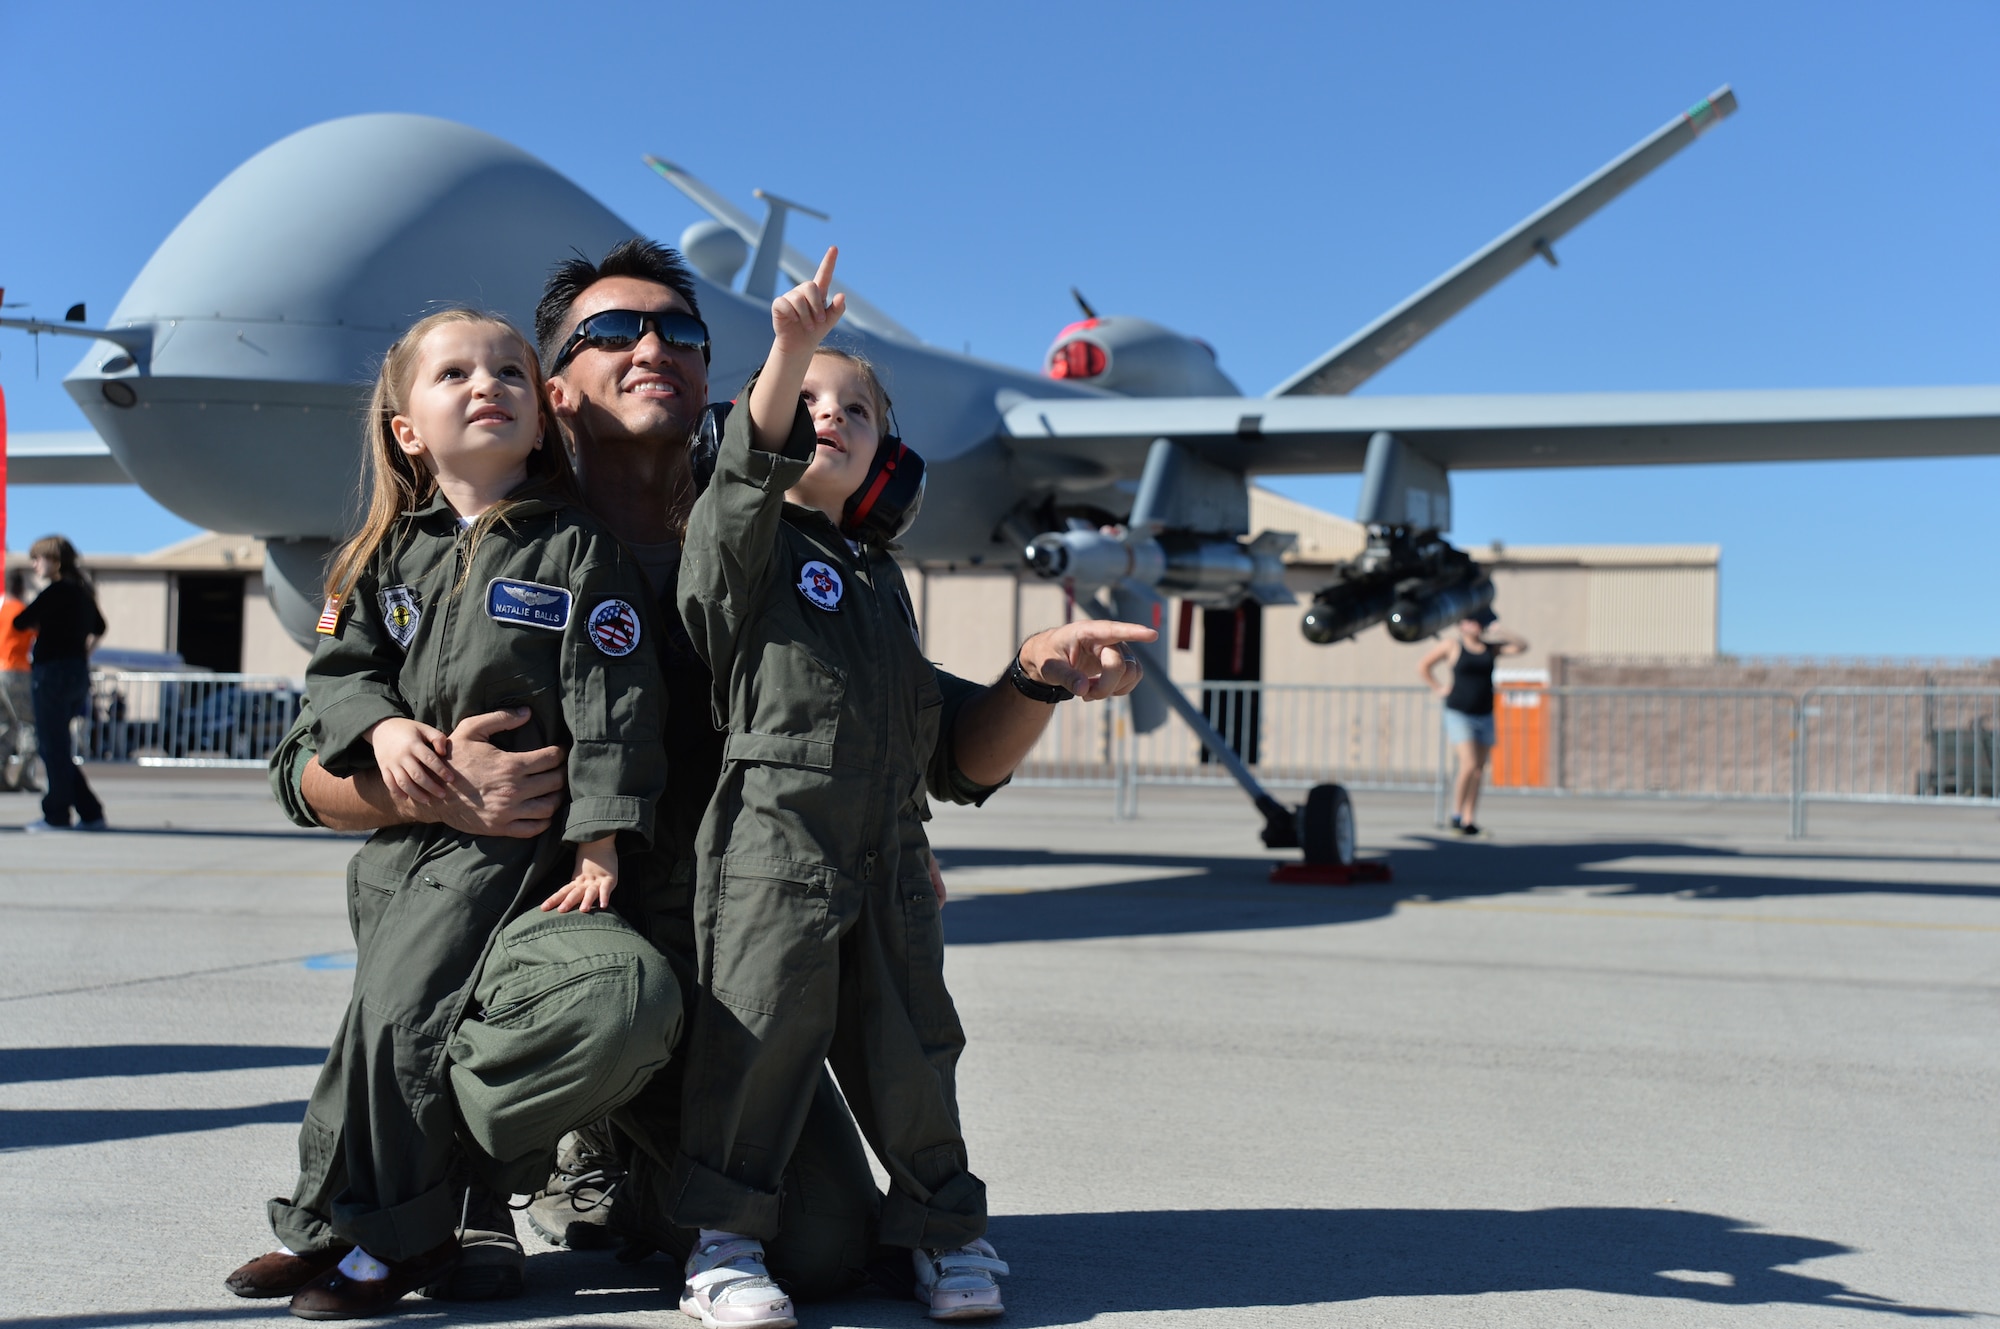 During April, families can expect to have an eventful month with the spotlight on children in the military. Families can join in on any of the events honoring the themes “Month of the Military Child,” as well as “Child Abuse Awareness Month.” (Photo by Tech. Sgt. Nadine Y. Barclay)